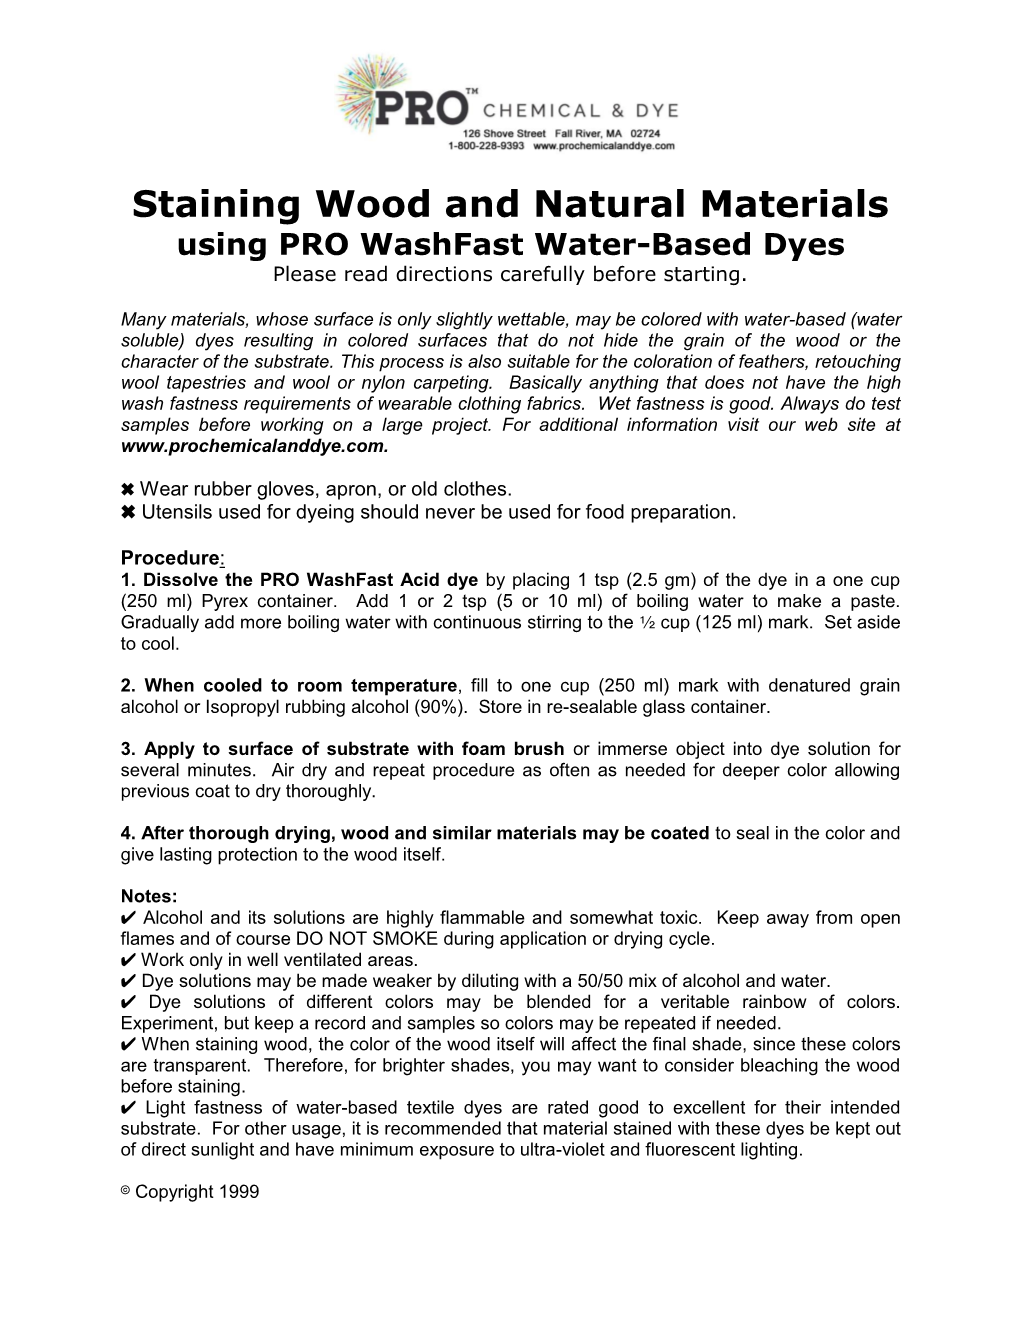 Staining Wood and Natural Materials Using PRO Washfast Water Based